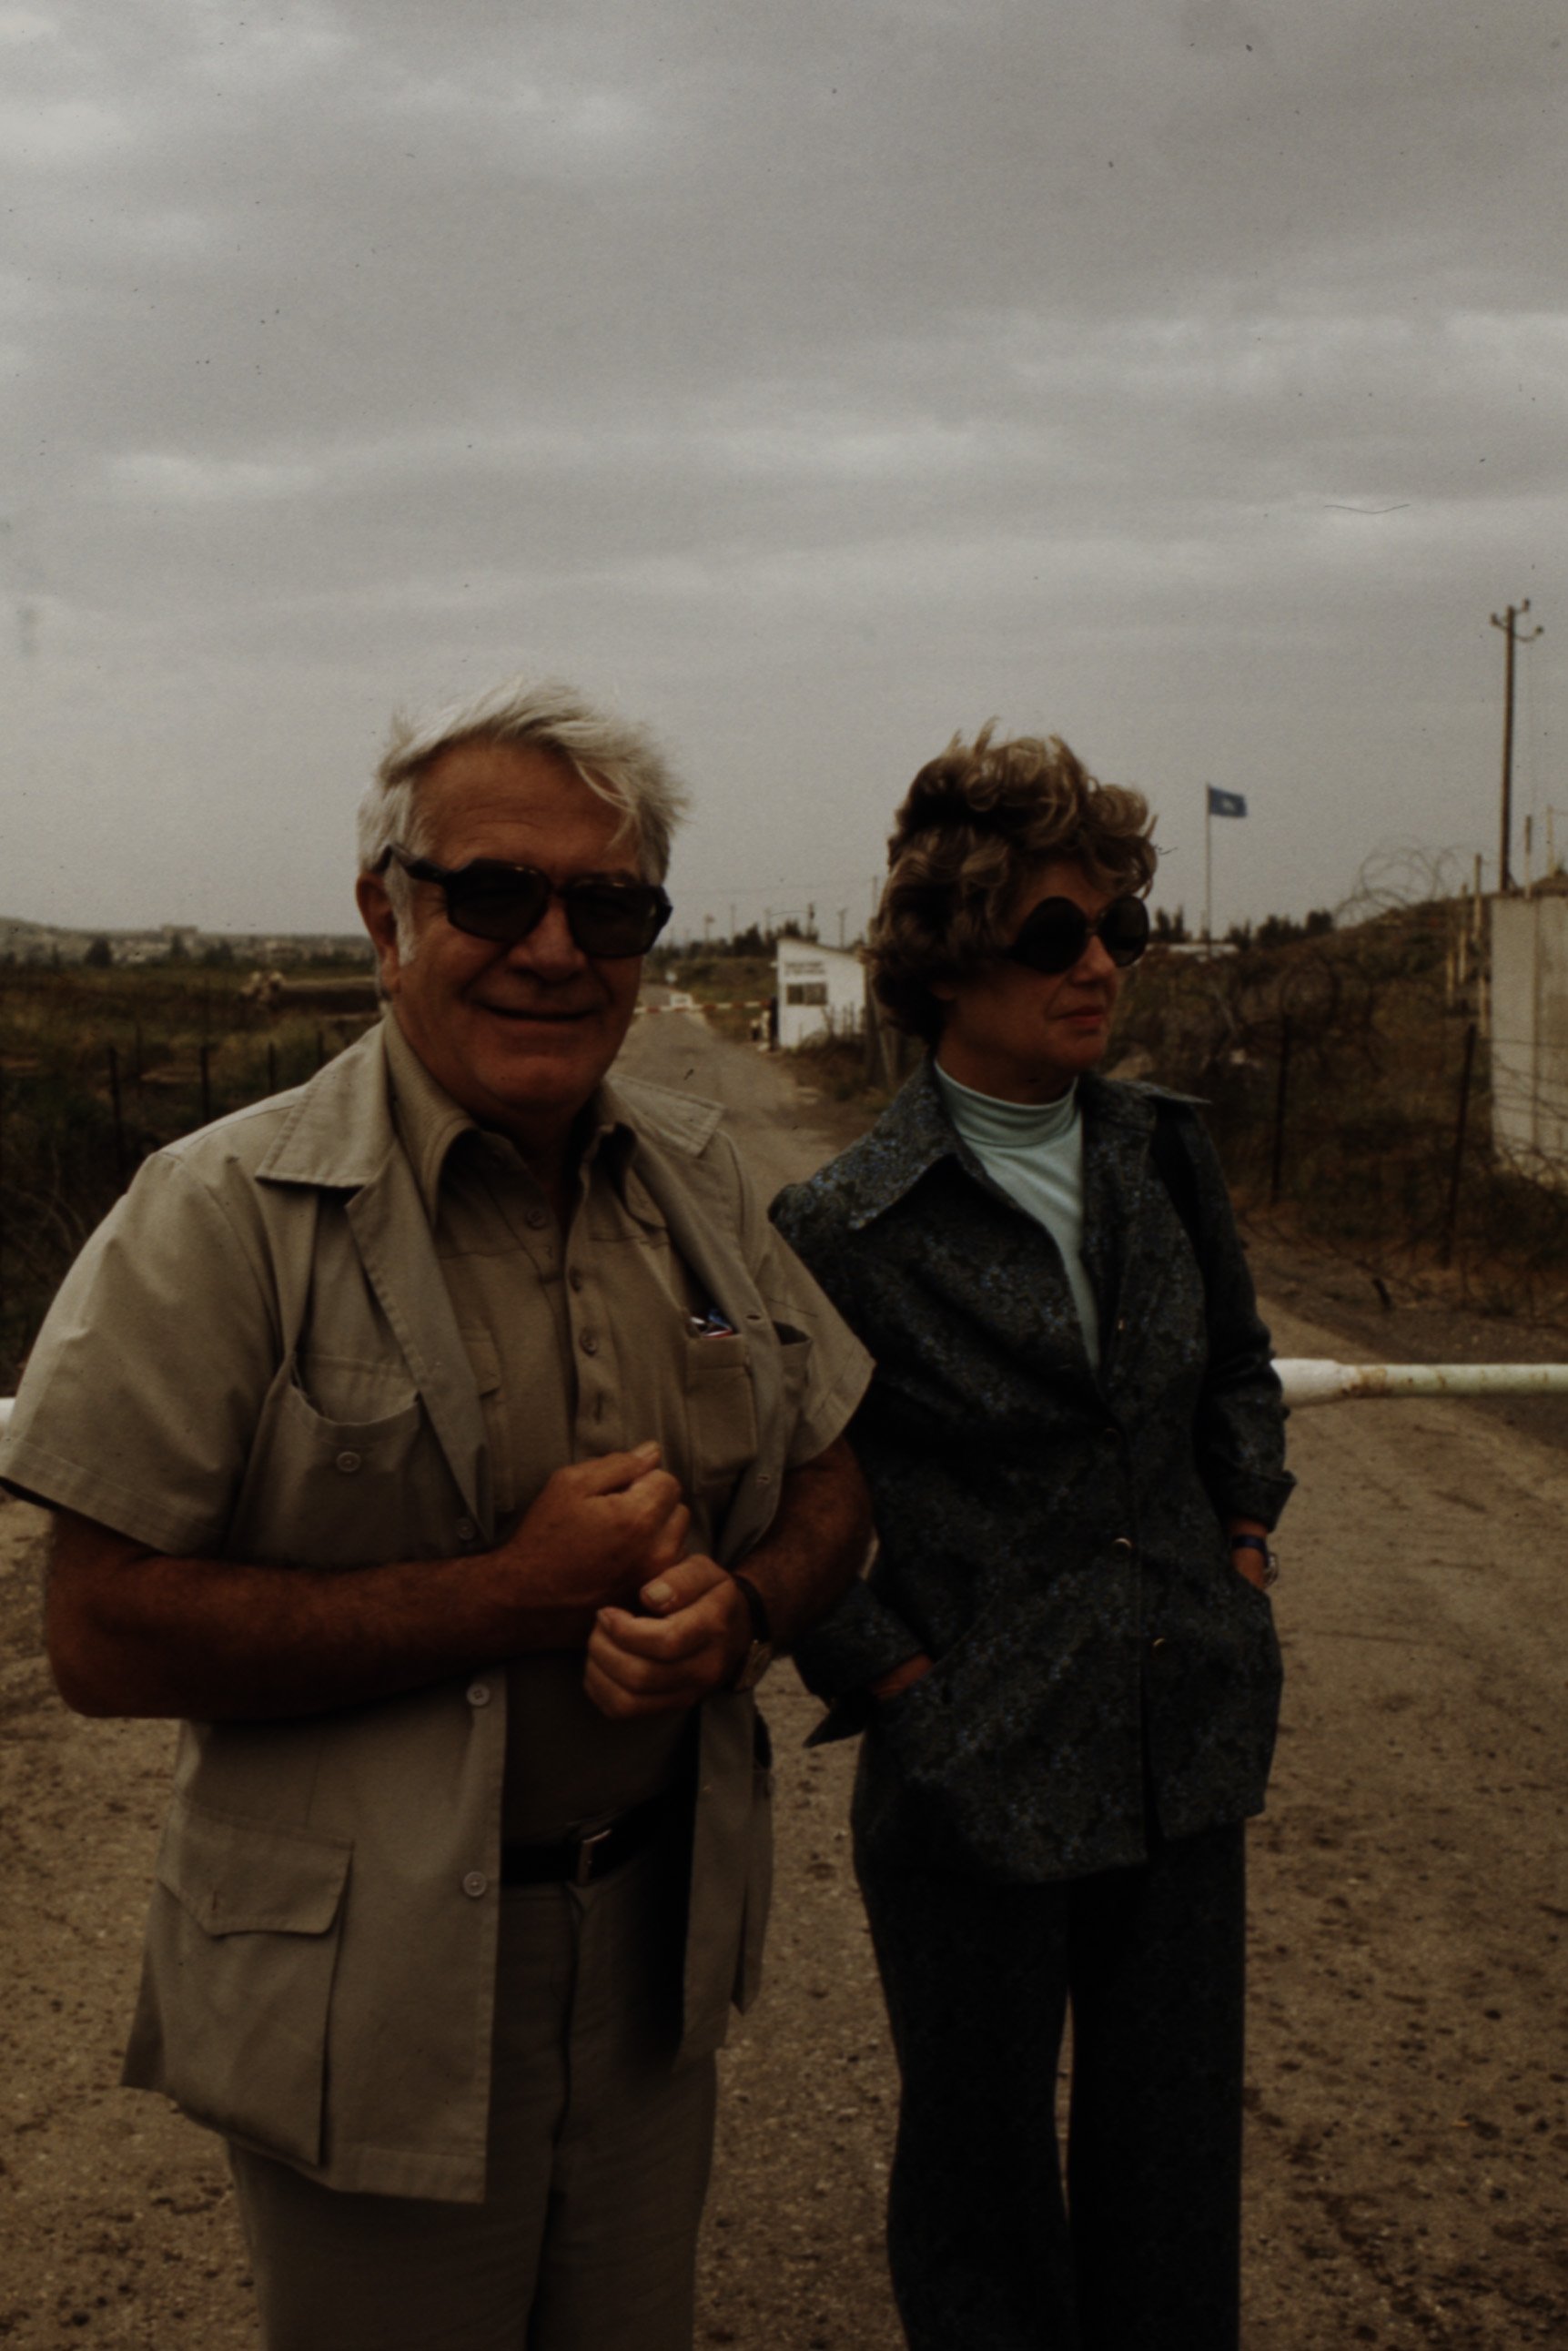 Harry Reasoner and Kathleen Carroll Reasoner on assignment for ABC News in Israel circa 1977 | Photo: Disney General Entertainment Content/Getty Images